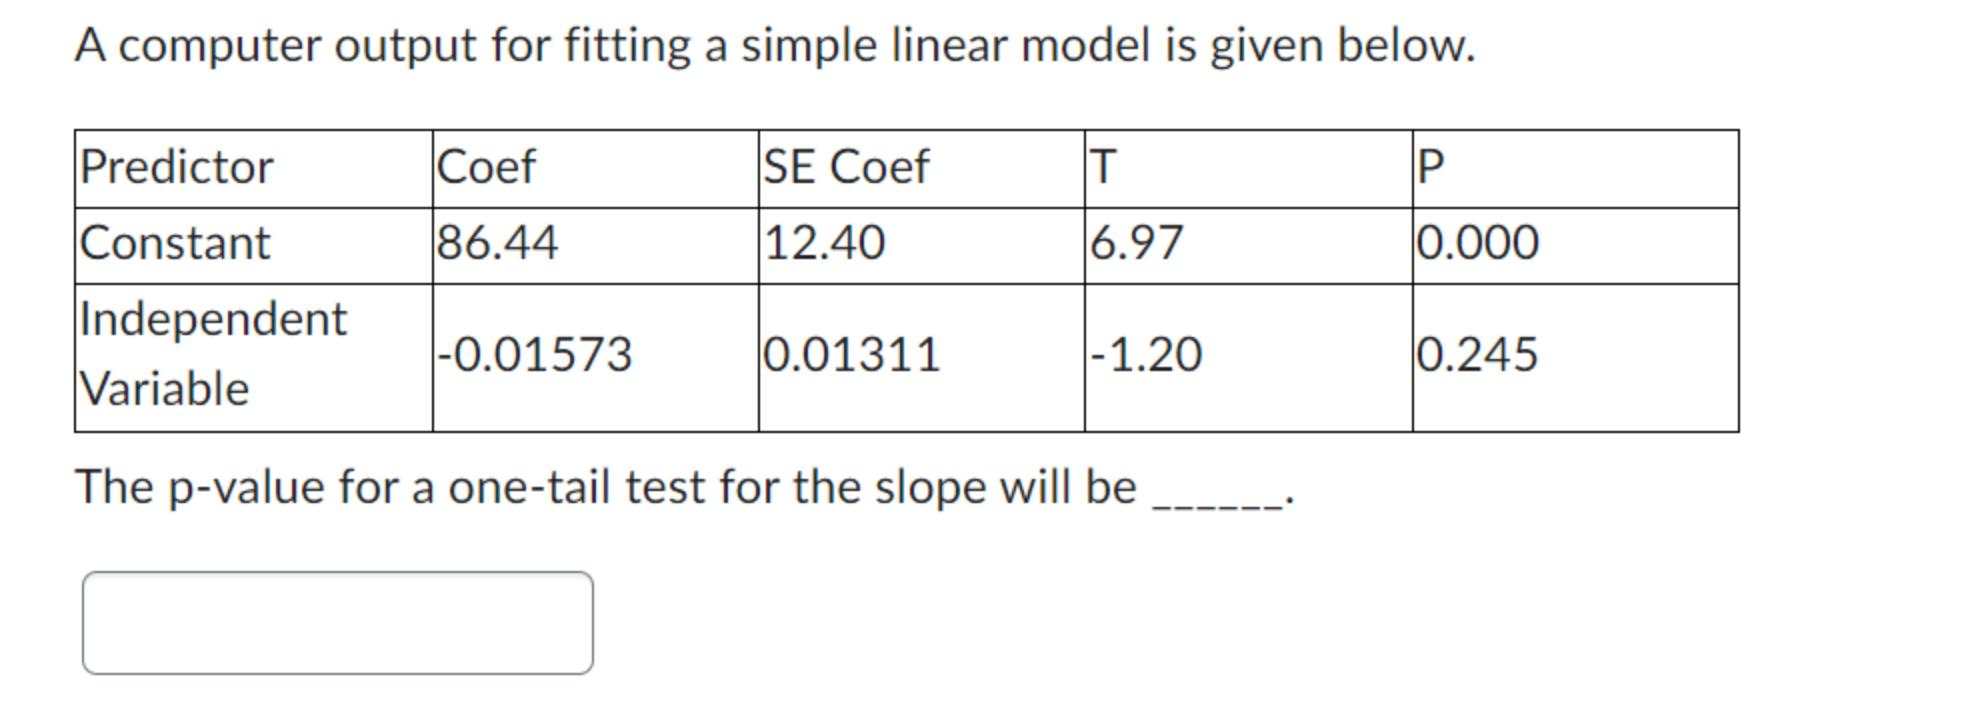 A computer output for fitting a simple linear model is given below. T 6.97 Predictor Constant Independent